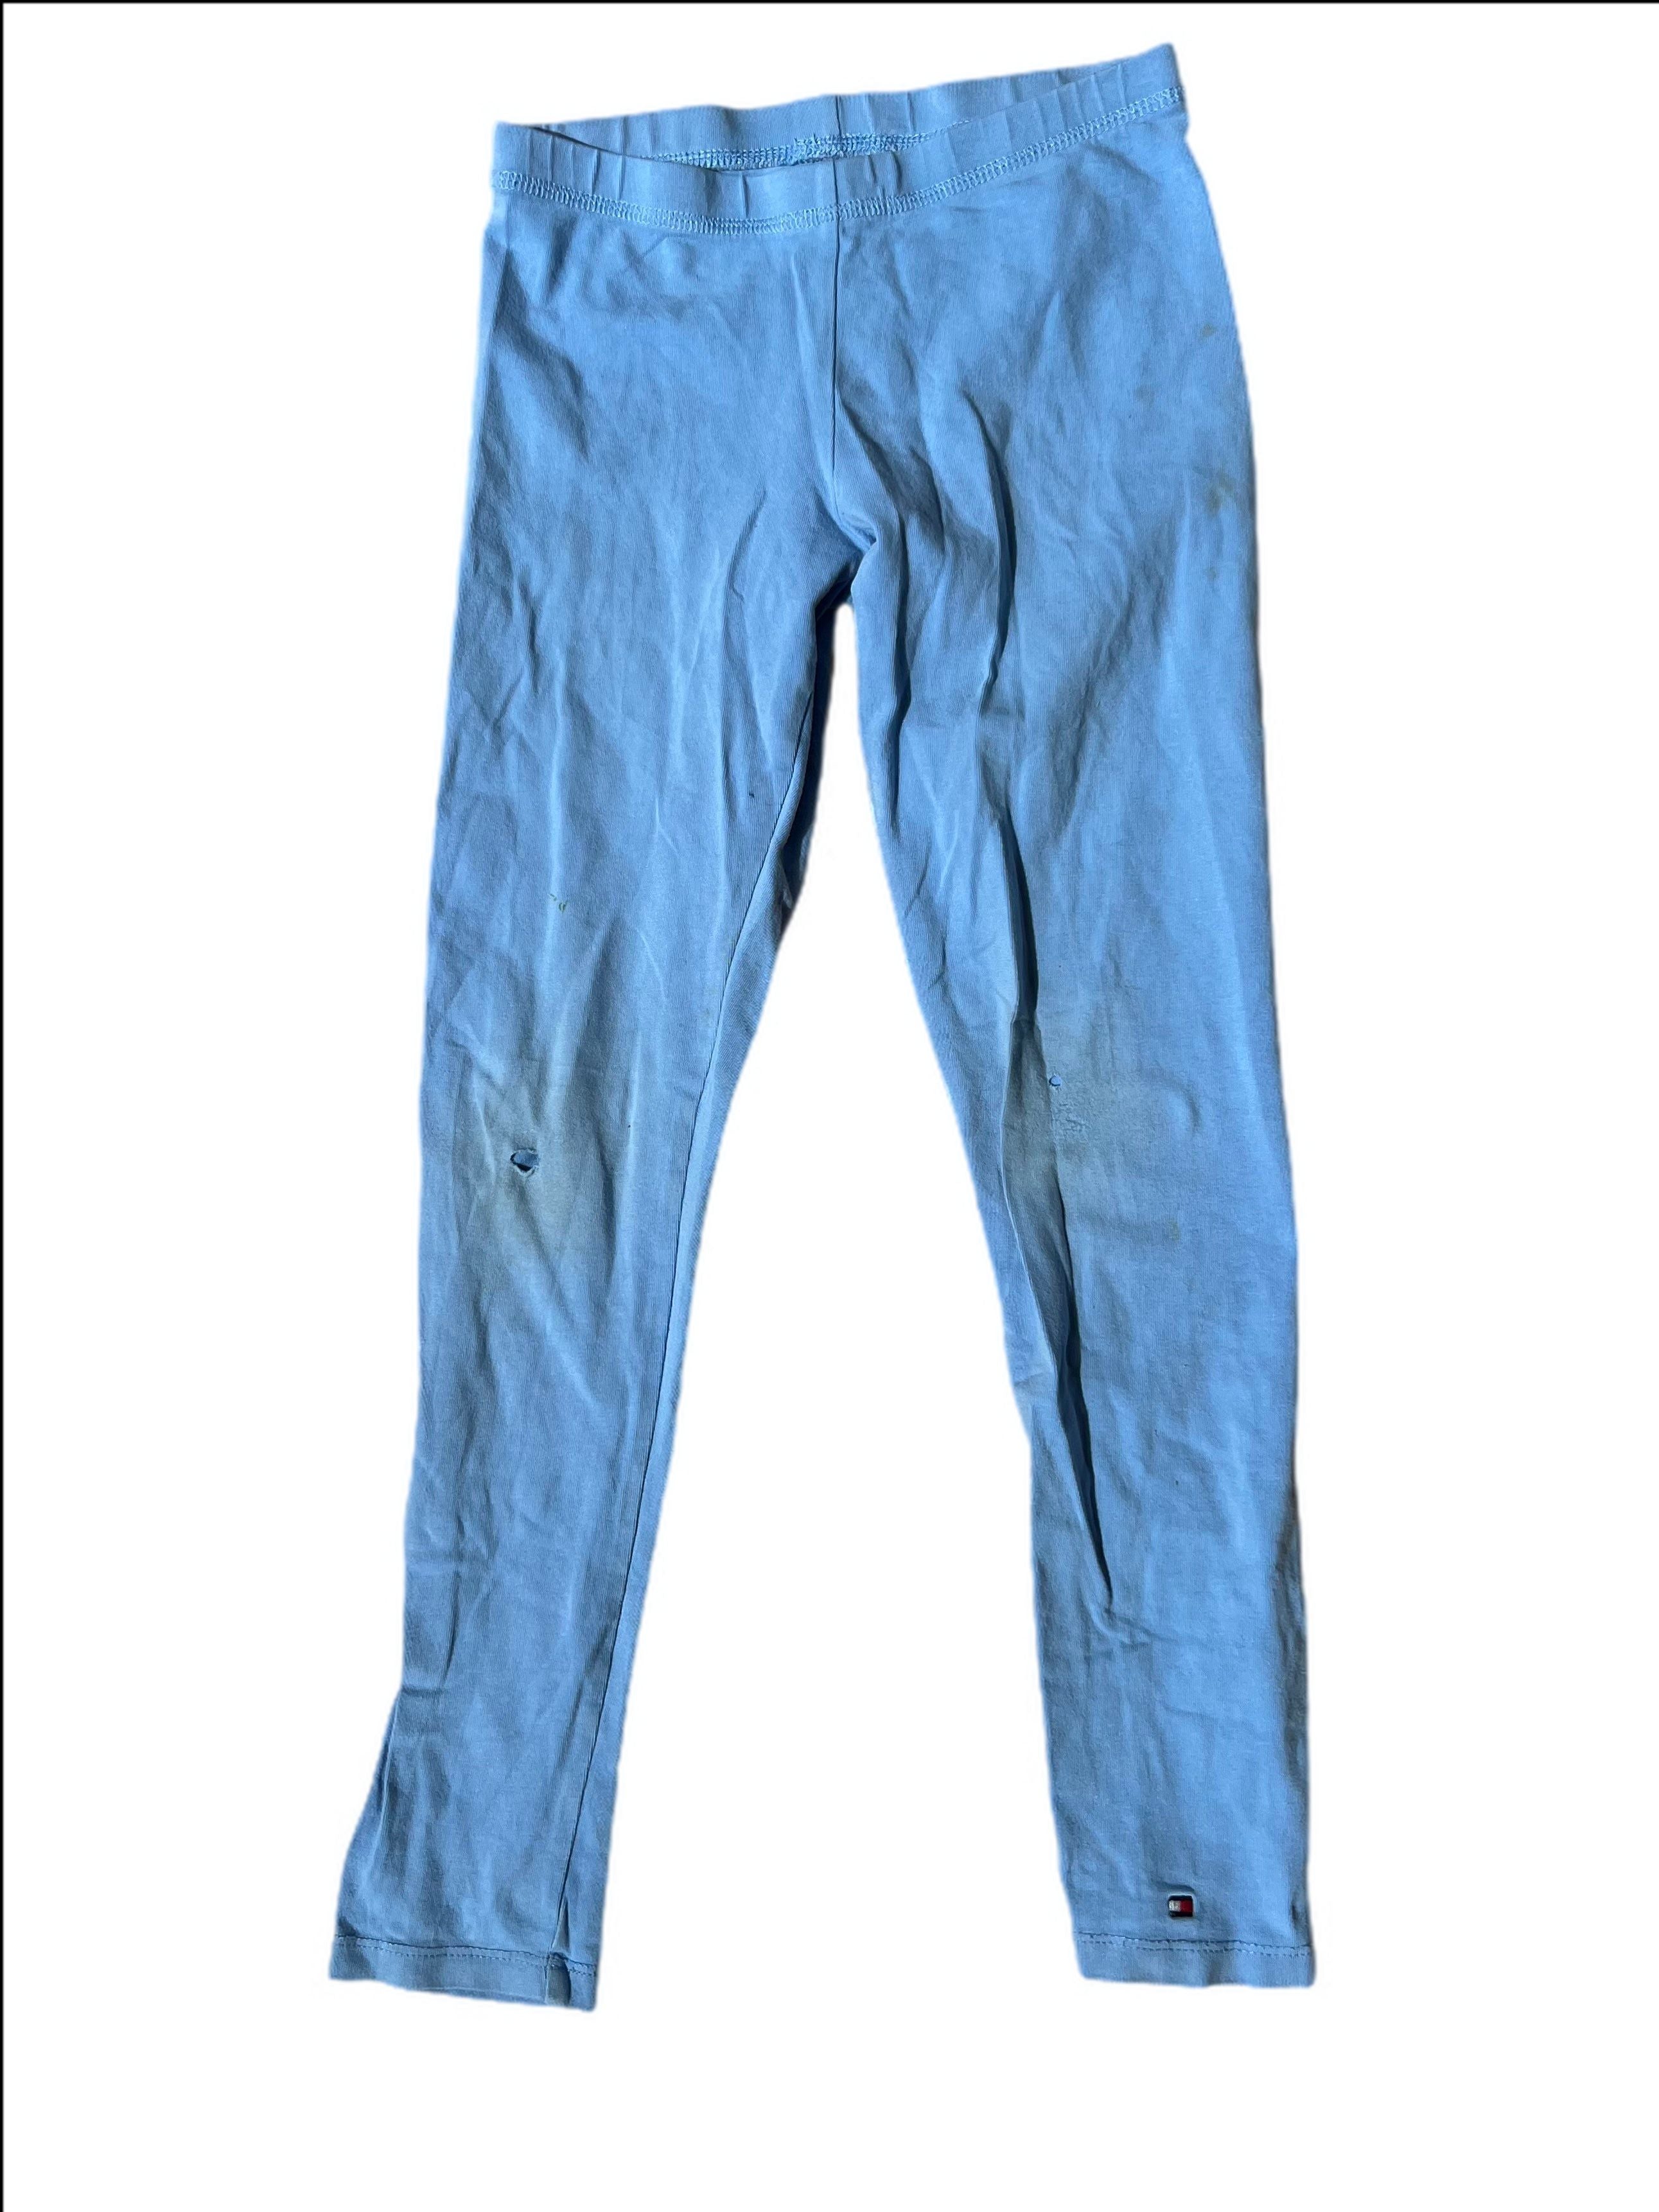 Buy Lux Lyra Ankle Length Legging L83 Denim Free Size Online at Low Prices  in India at Bigdeals24x7.com